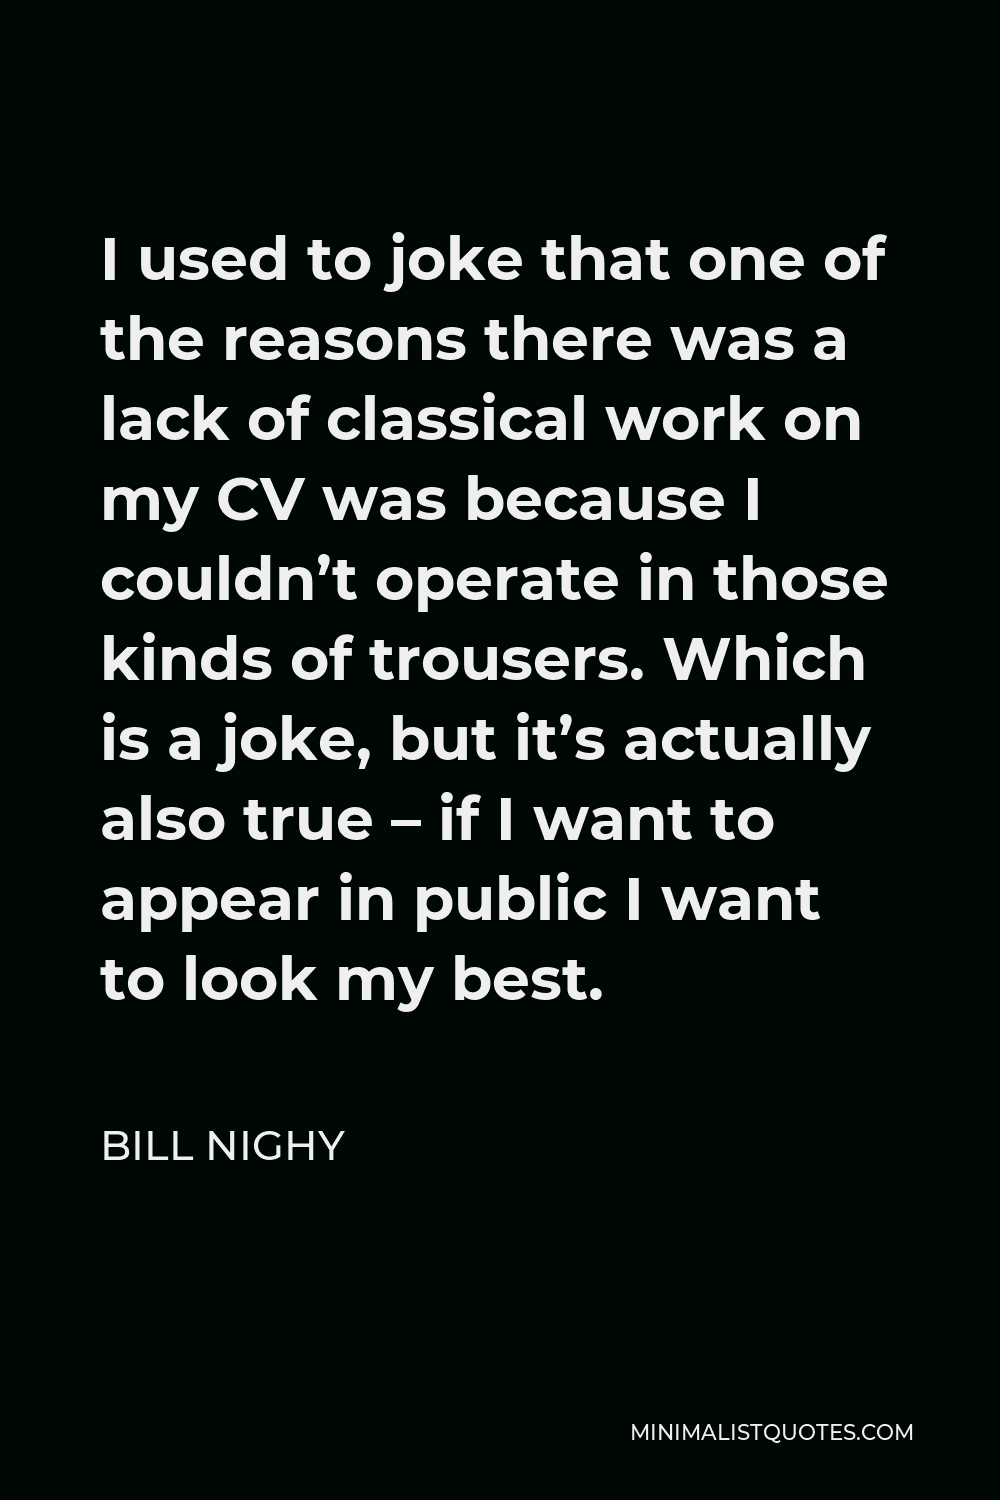 Bill Nighy Quote - I used to joke that one of the reasons there was a lack of classical work on my CV was because I couldn’t operate in those kinds of trousers. Which is a joke, but it’s actually also true – if I want to appear in public I want to look my best.